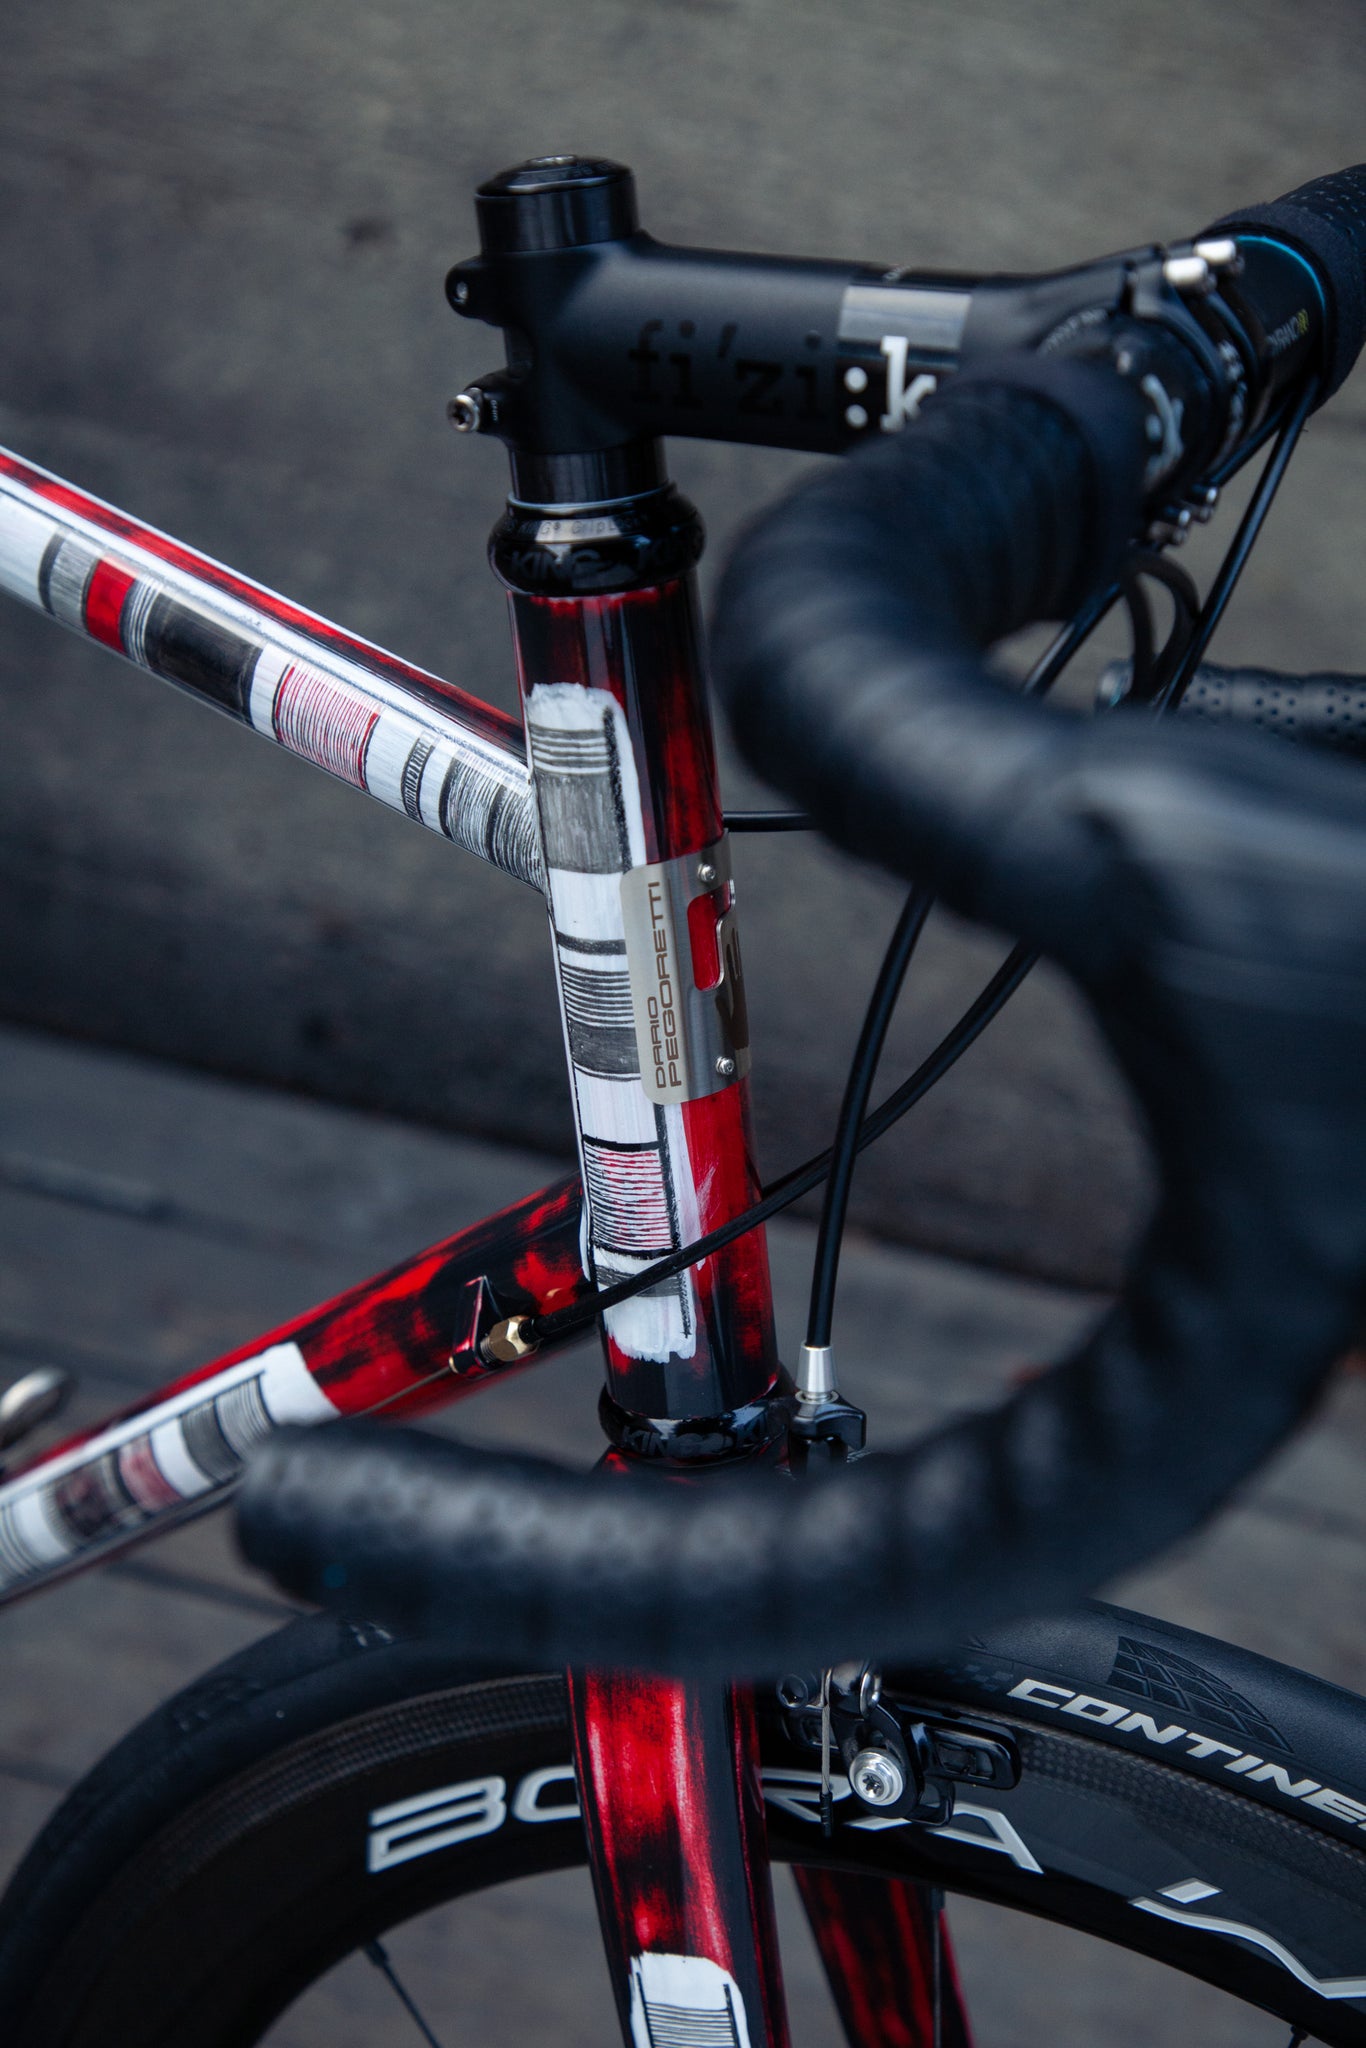 Gallery: A Wine Red Pegoretti Mxxxxxo – Above Category